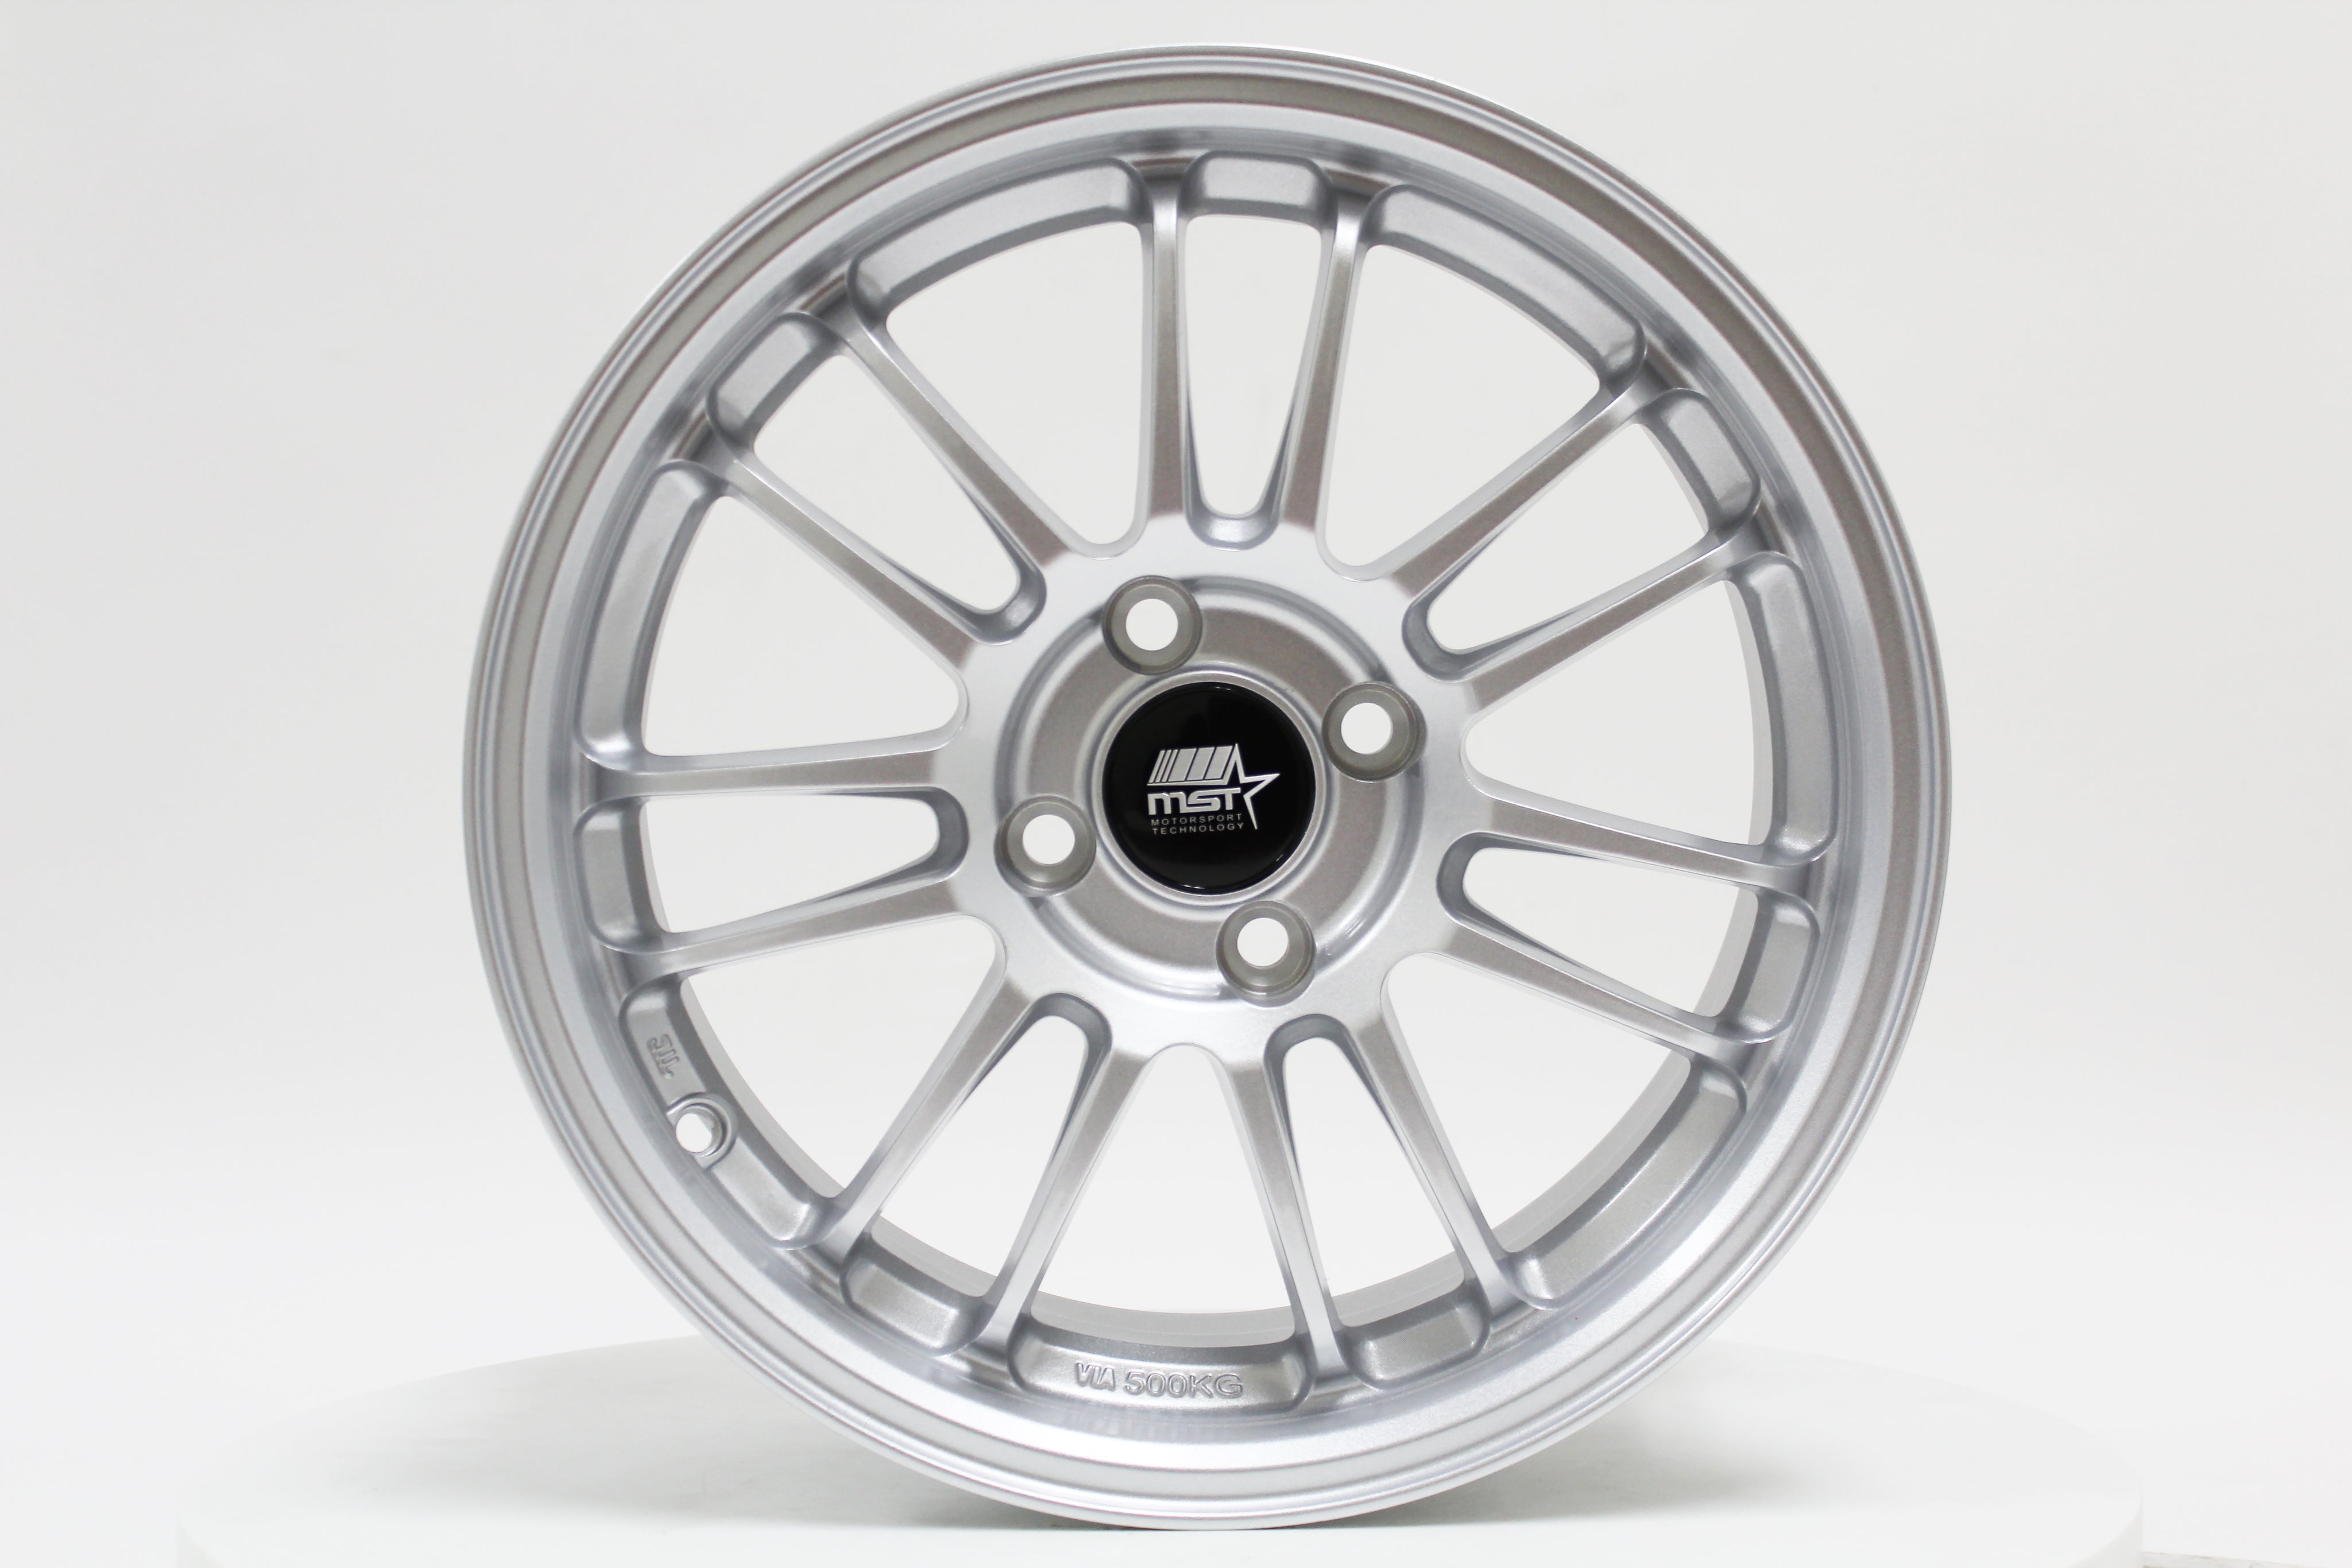 MST Wheels MT45 Glossy Silver 15X7.0 4X100 Offset +35 FLOW FORMED